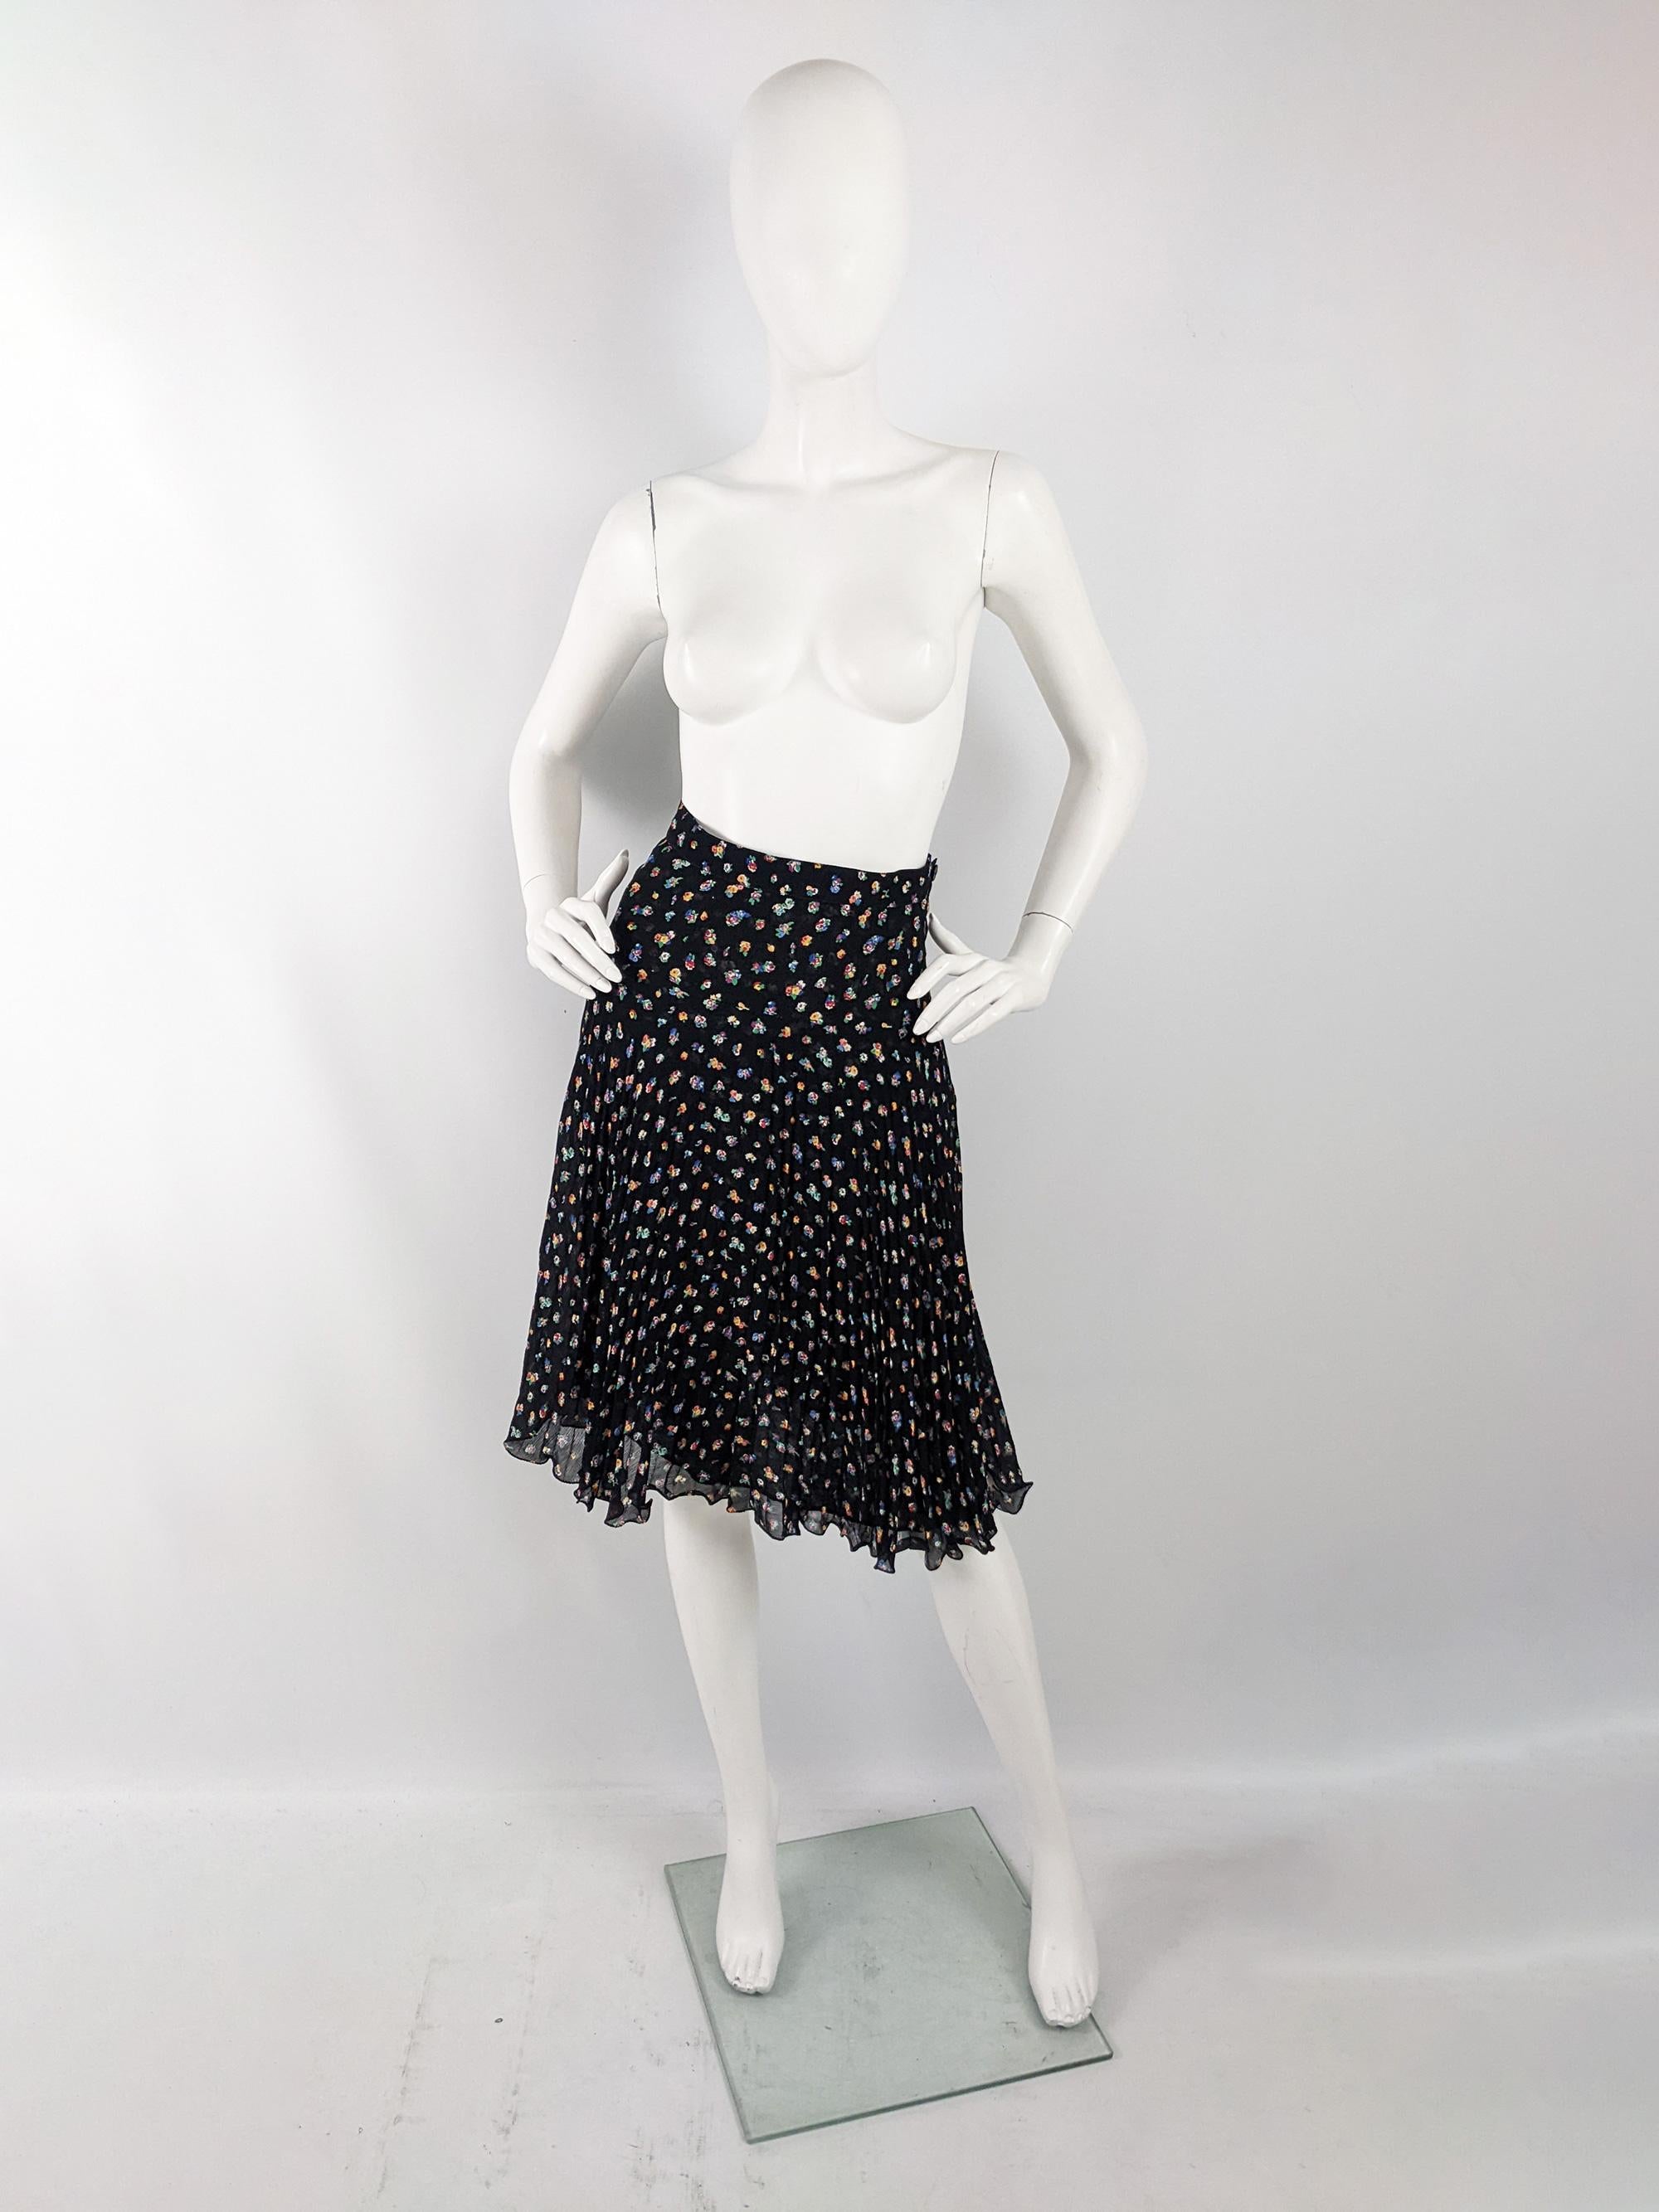 A cute vintage womens skirt from the 80s by quality Italian designer, Mariella Burani for Amuleti. In a lightweight black slightly sheer georgette fabric with a floral print thrroughout. It has a high waist and pleats throughout.

Size: Unlabelled;